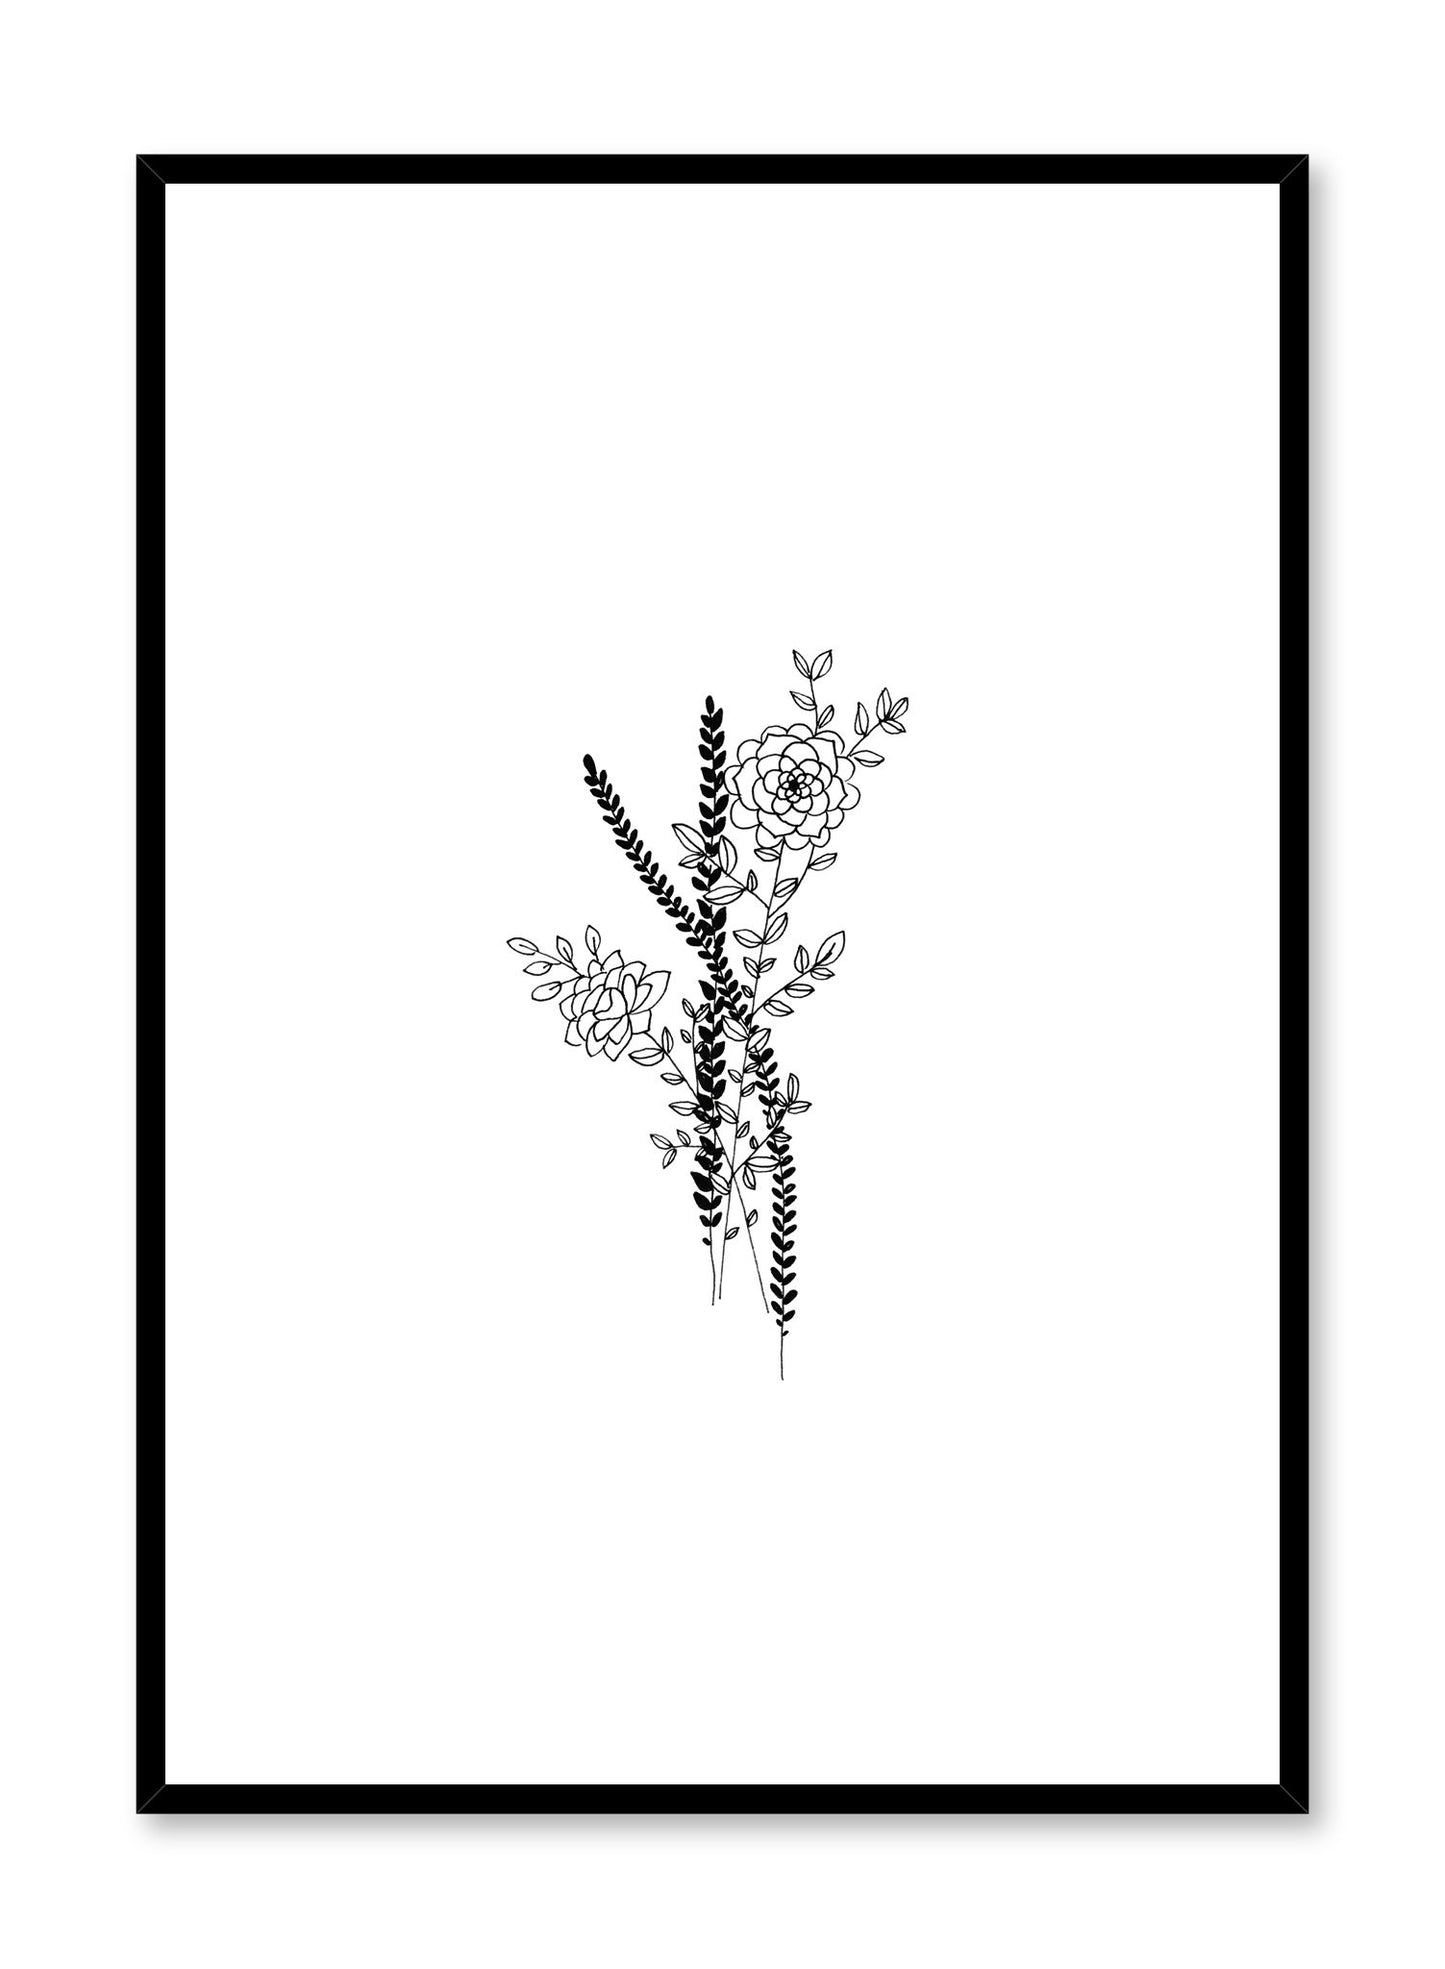 Modern minimalist poster by Opposite Wall with abstract line art illustration of Arrangement